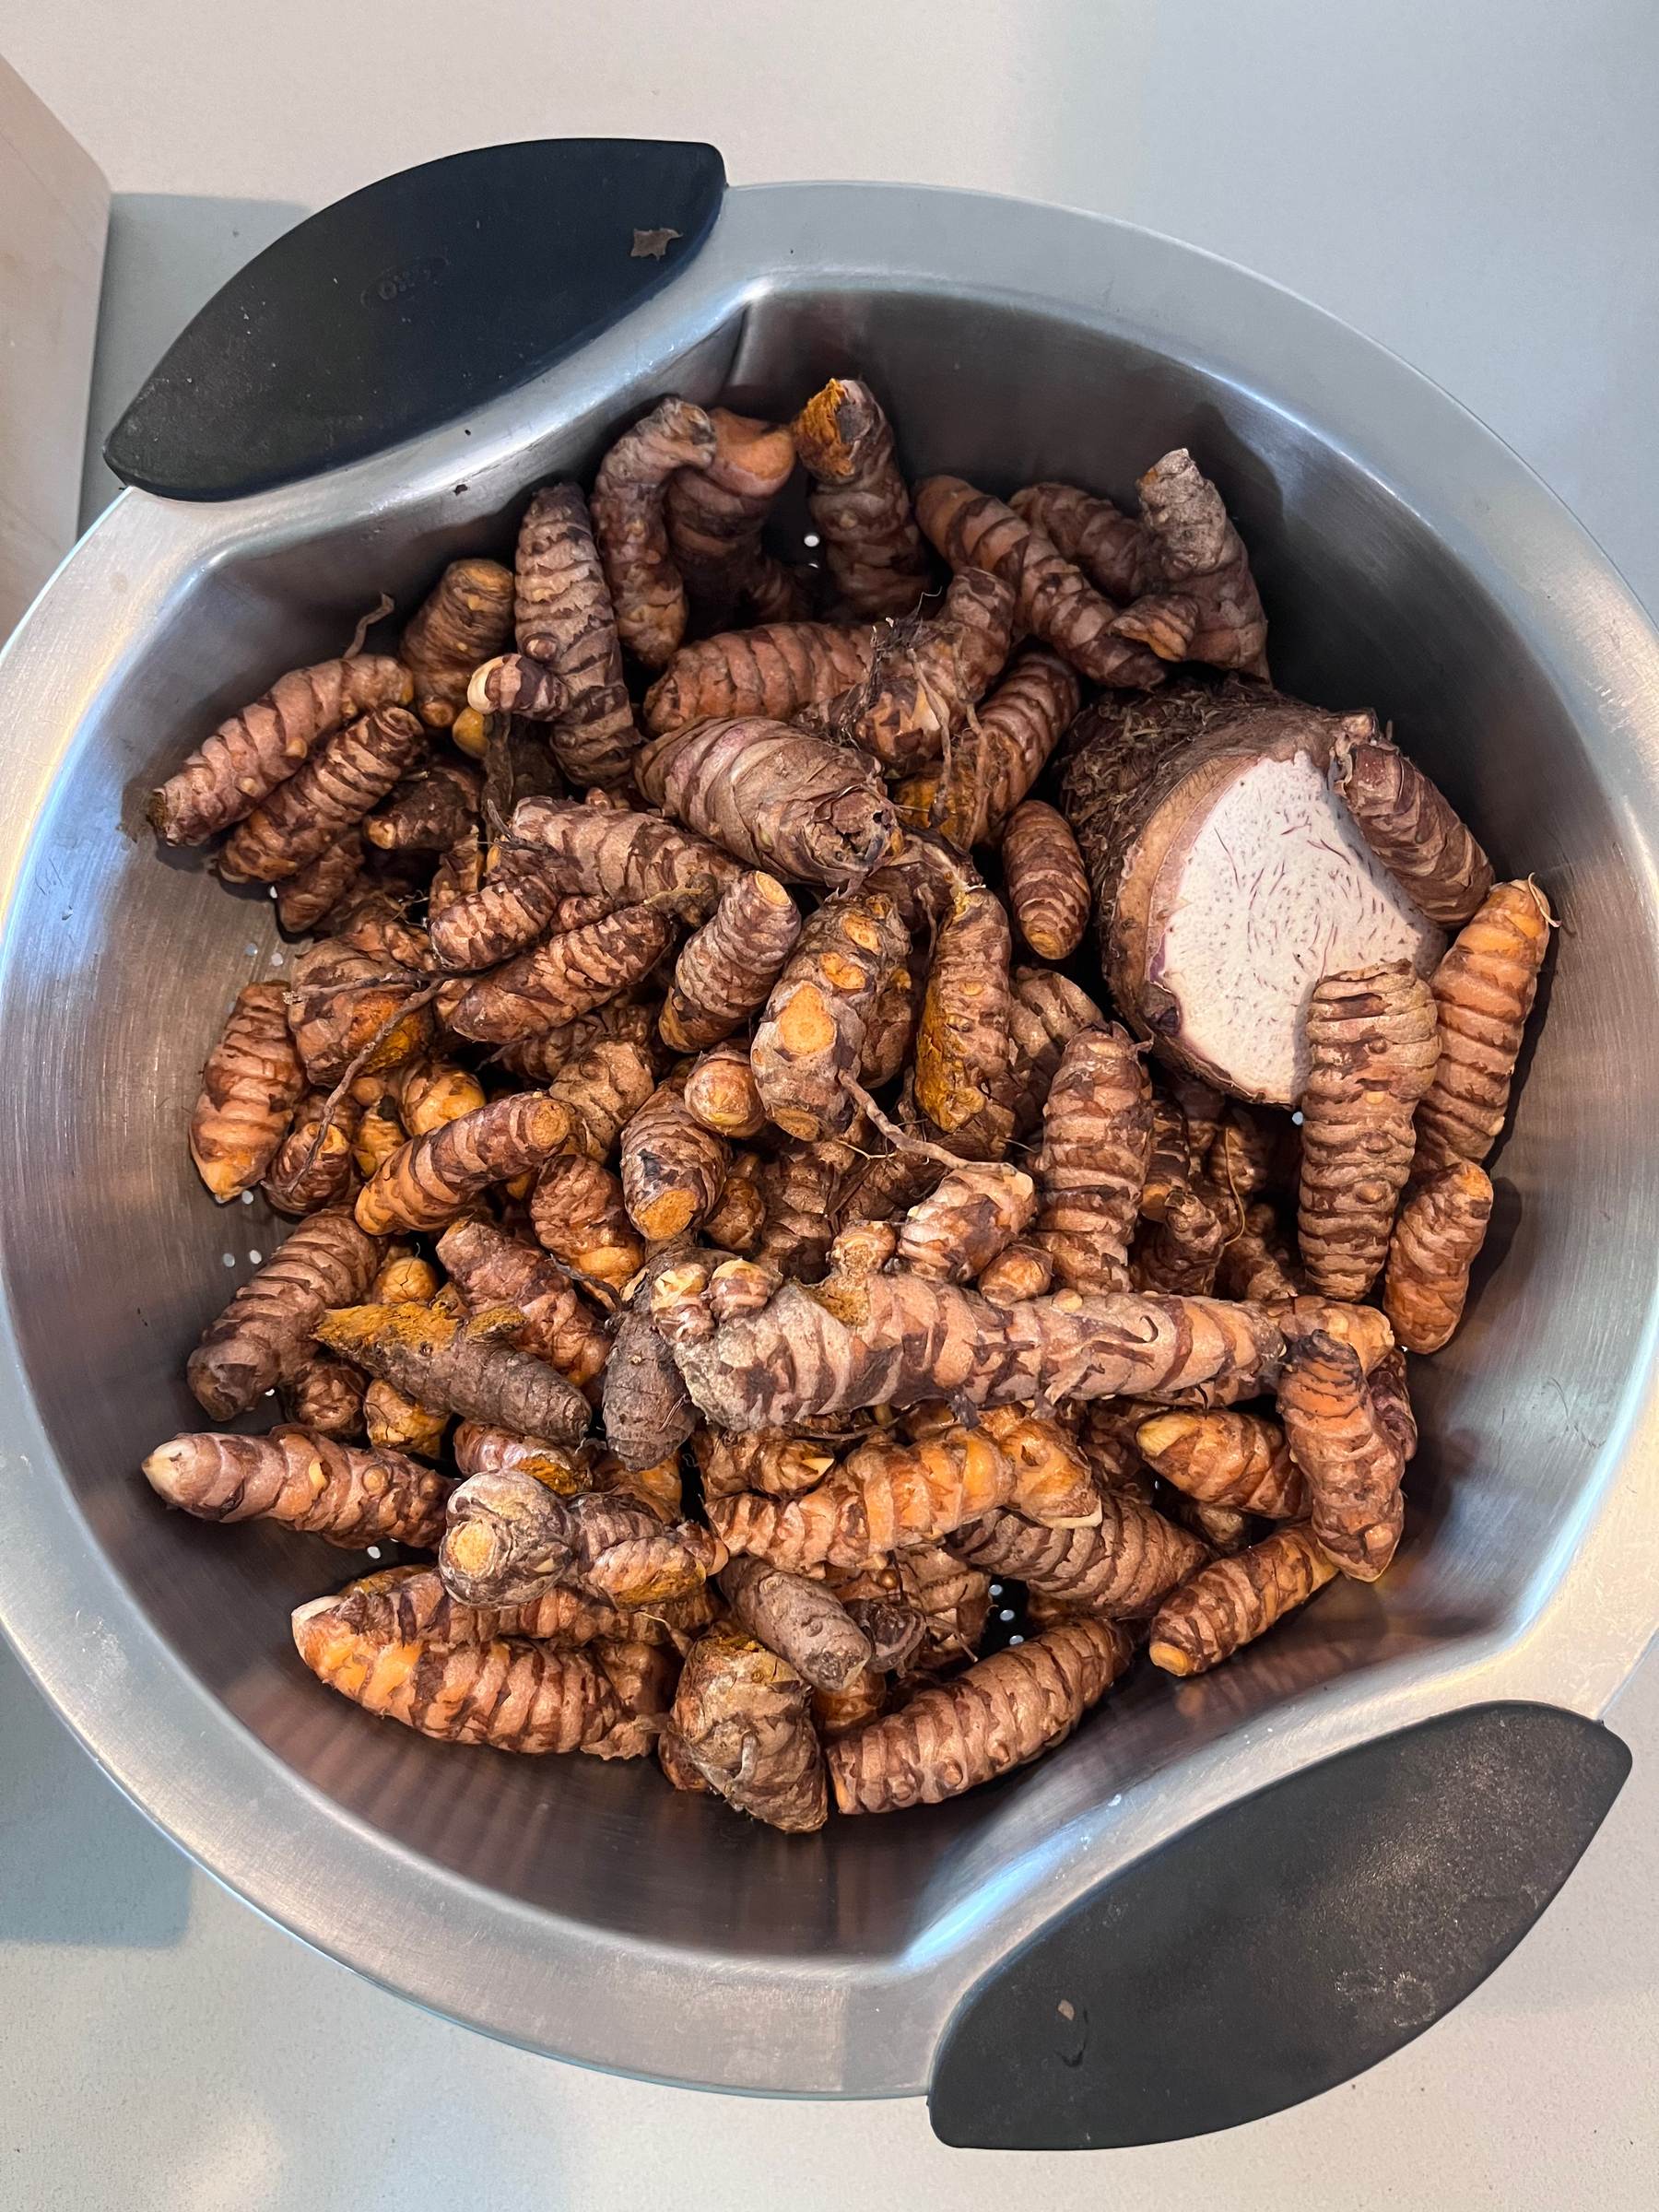 Harvested turmeric sitting in a colander after being washed